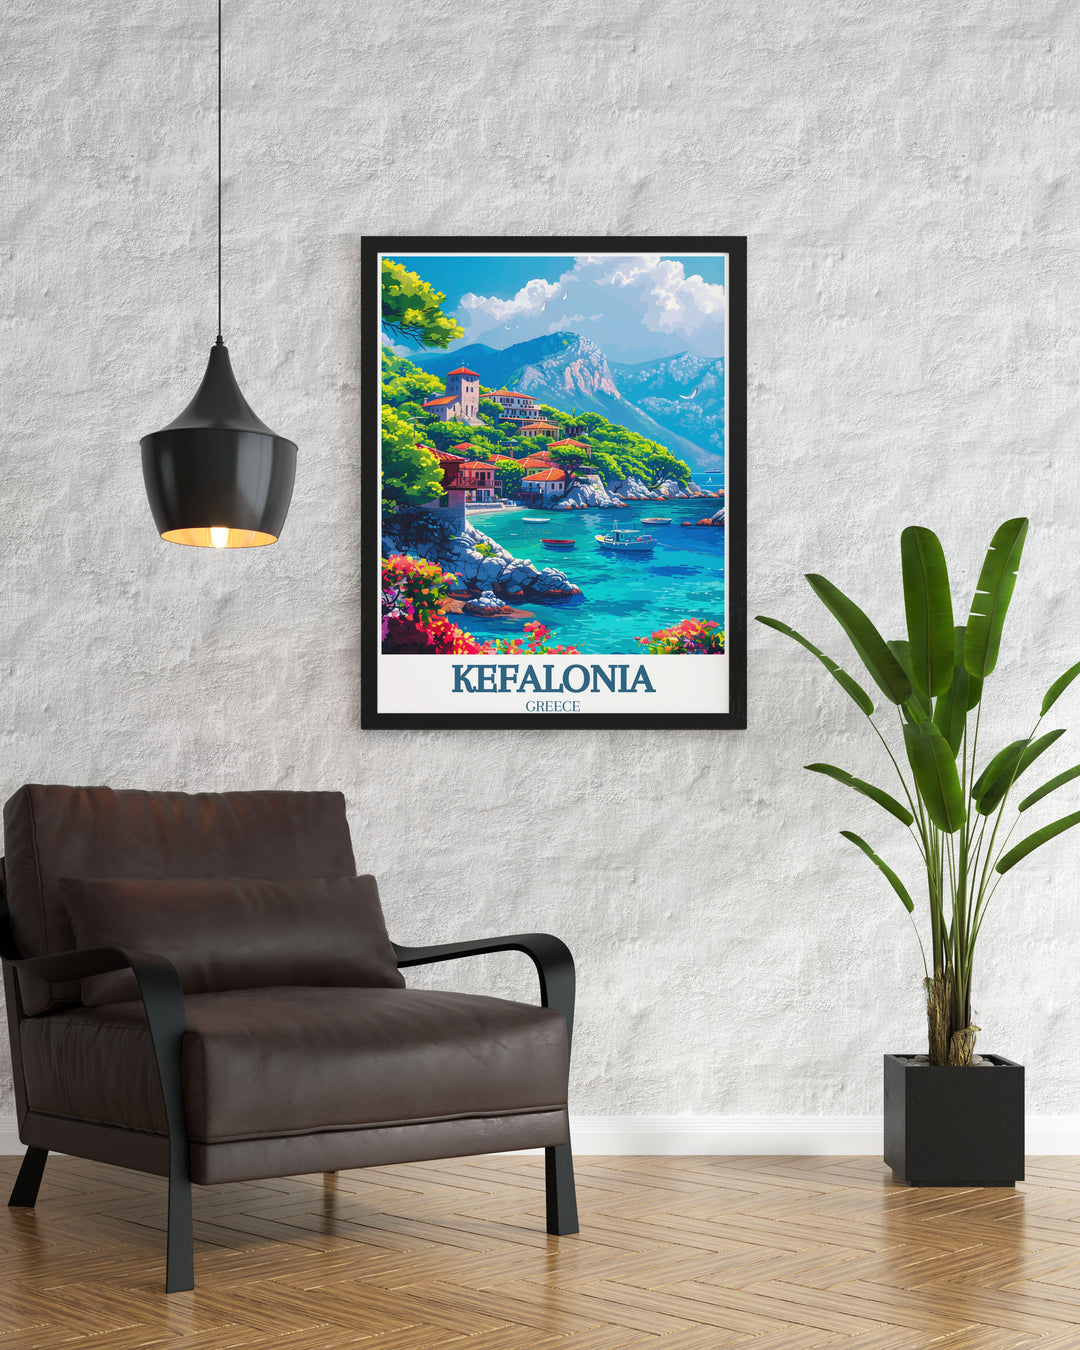 A vibrant travel print of Kefalonia, highlighting its dramatic coastlines, historical sites, and vibrant culture. The detailed artwork reflects the islands natural splendor and historical significance.